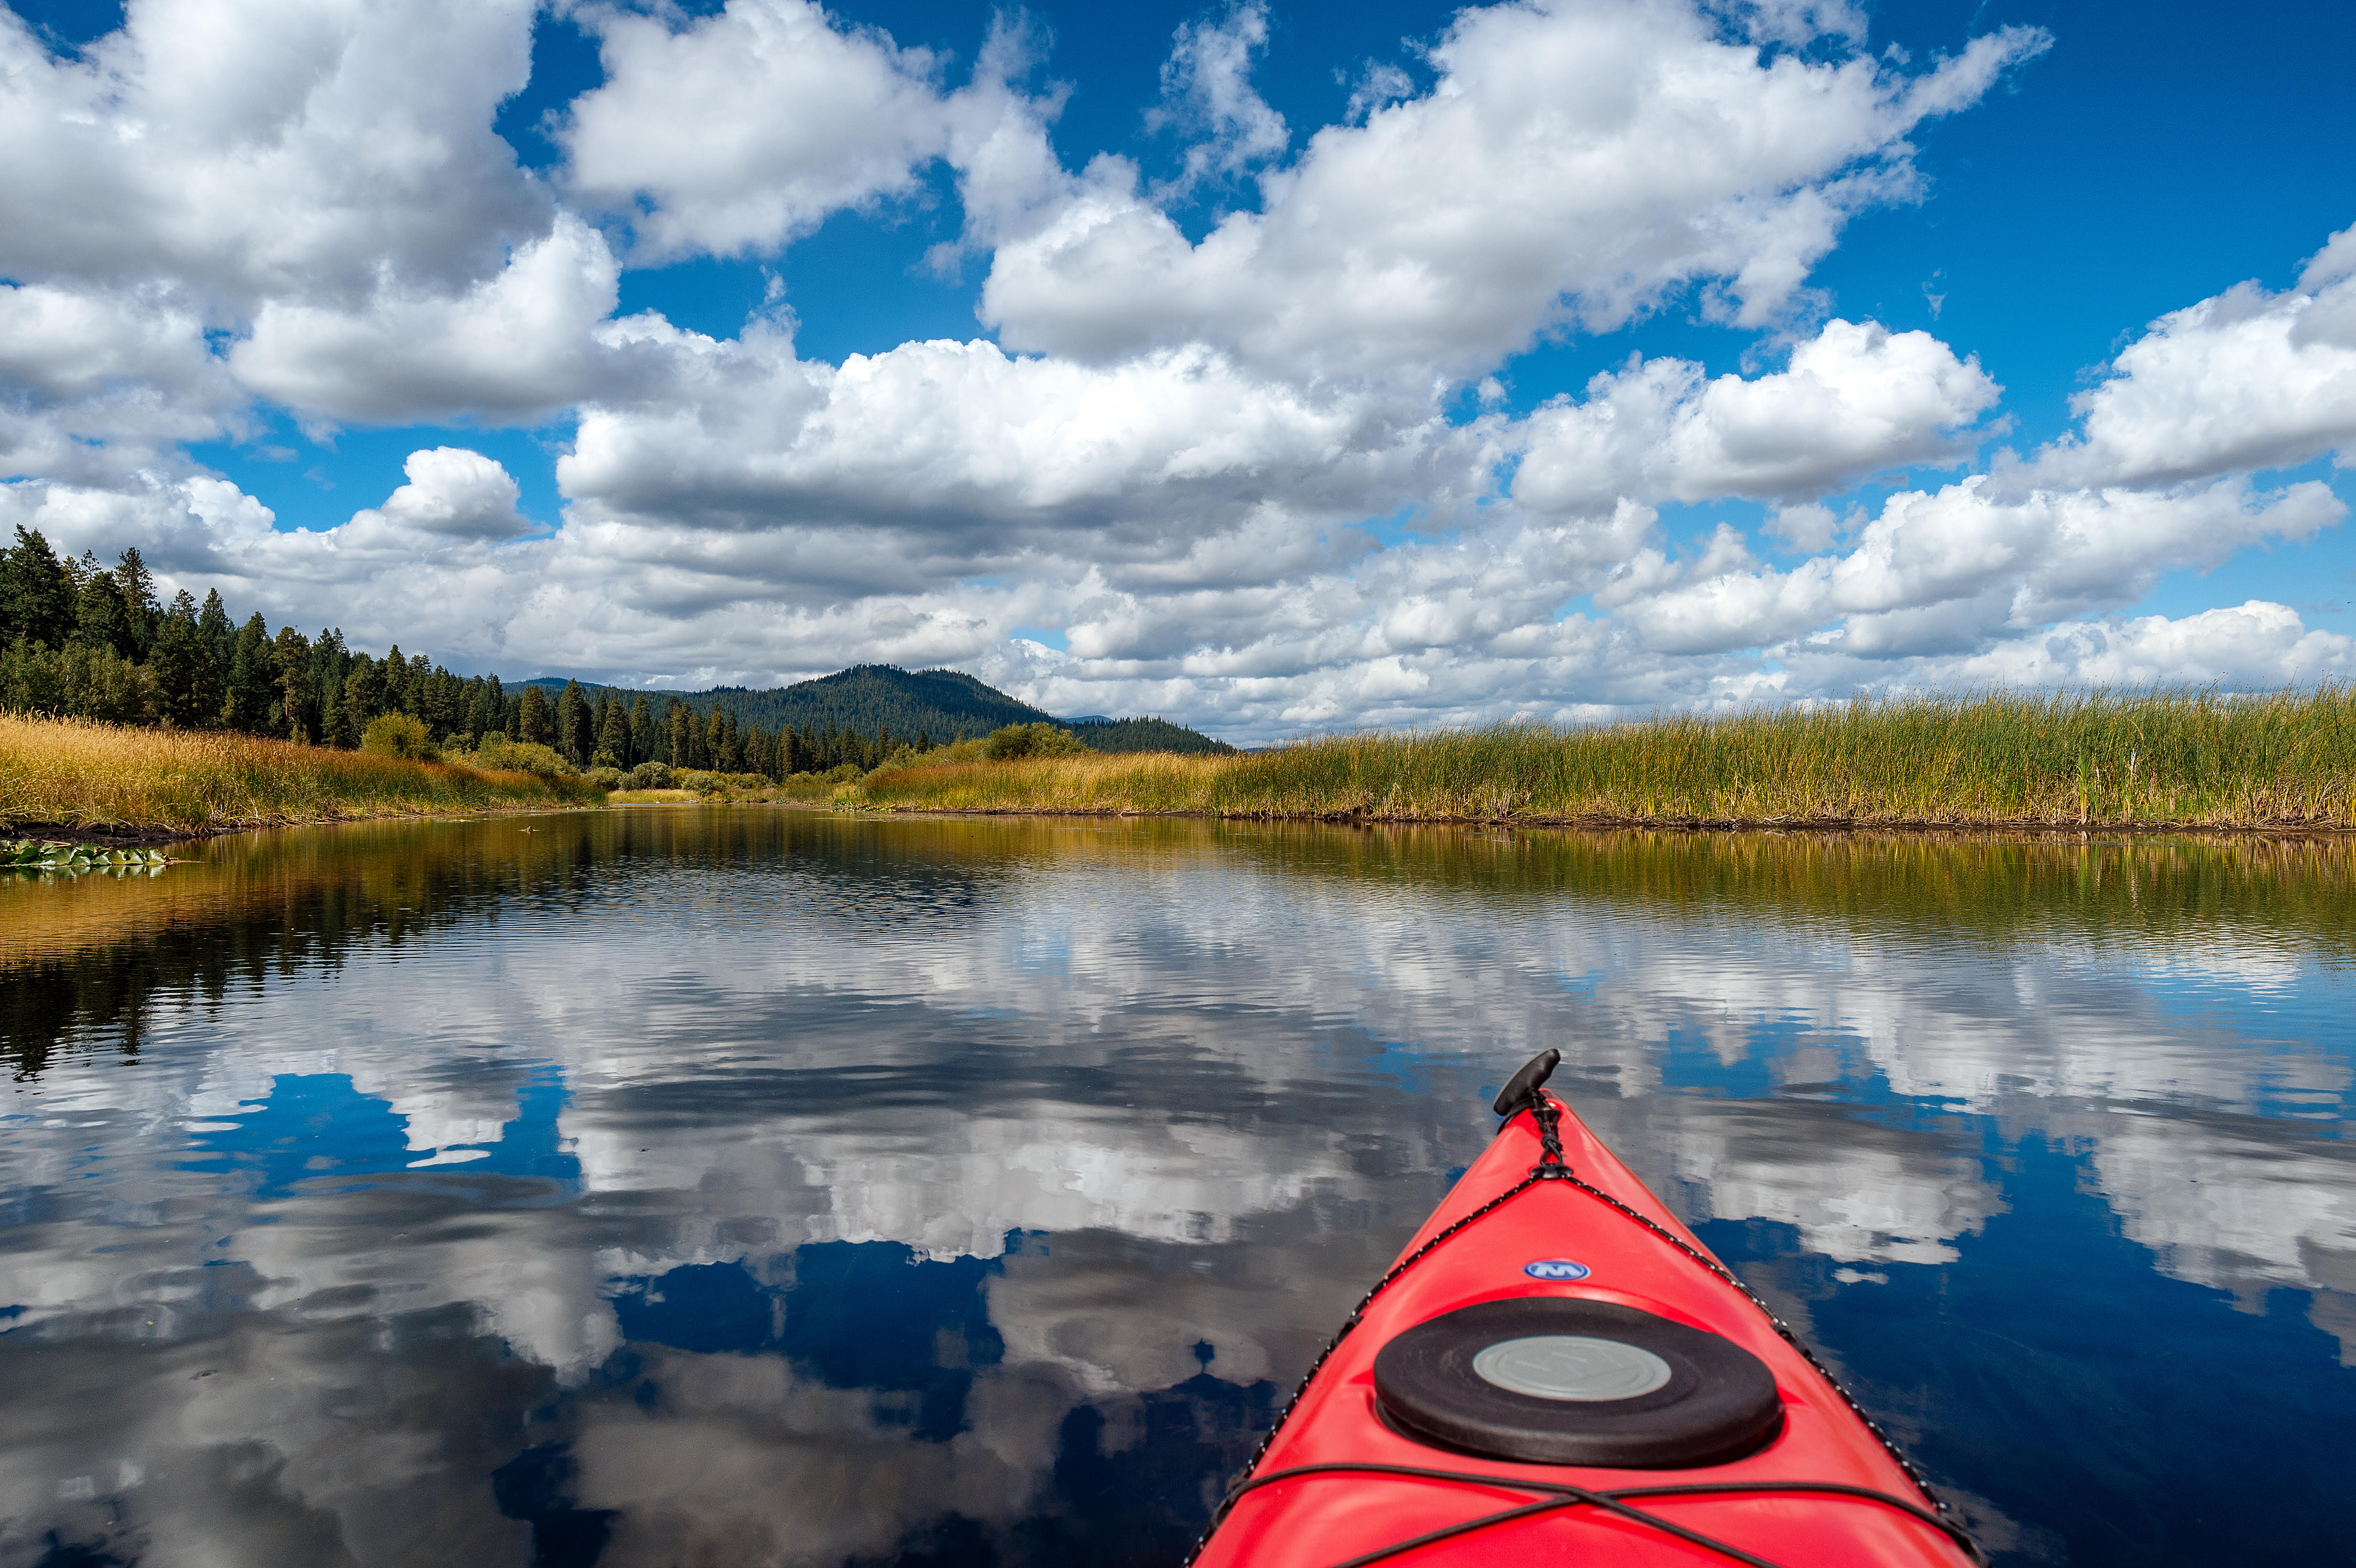 The front end of a red kayak points into clear water under a bright blue sky with some low clouds.